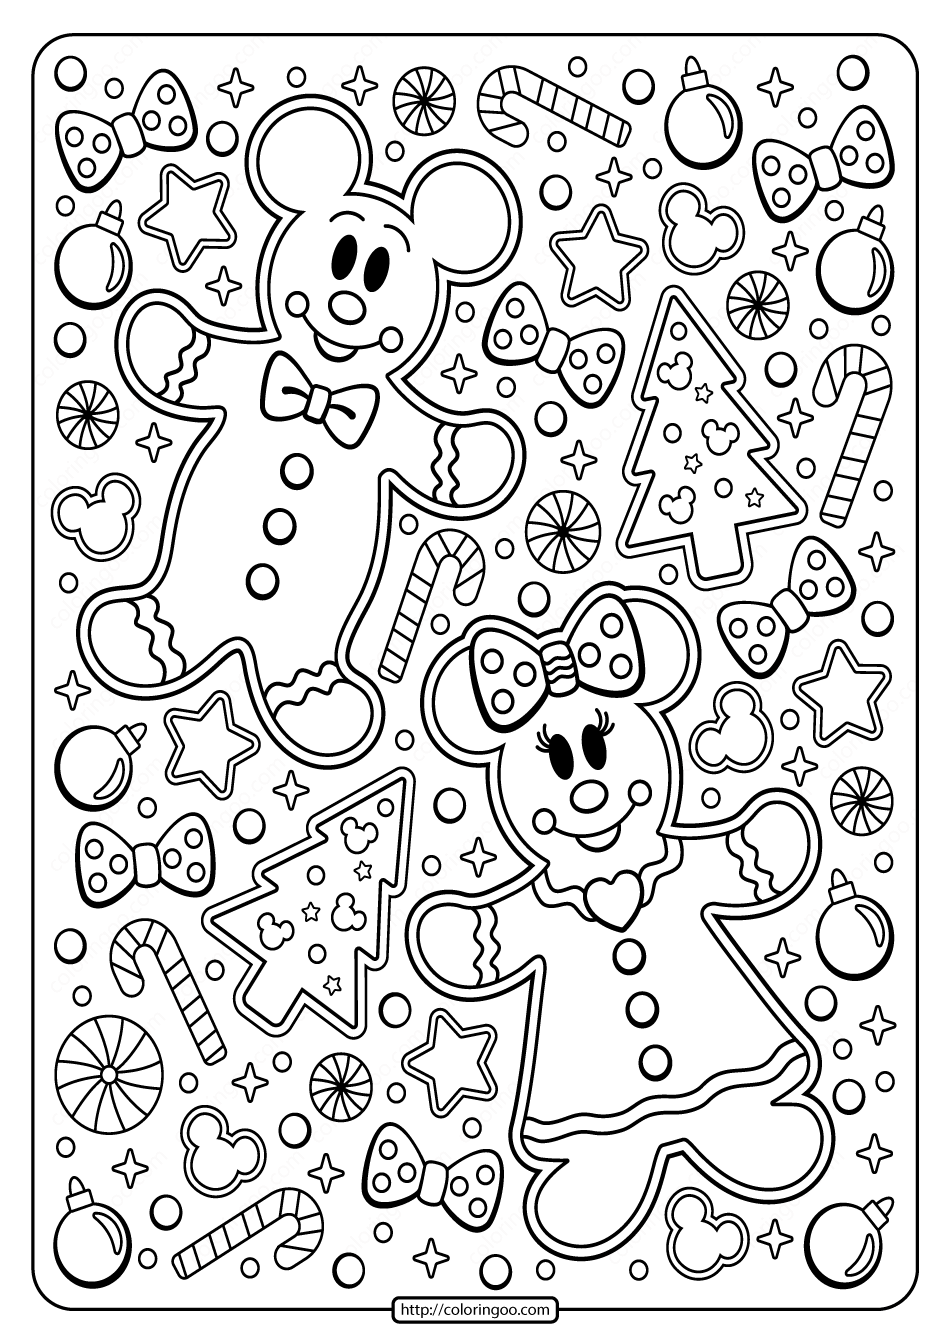 Mickey â minnie mouse holiday coloring page disney coloring pages kids christmas coloring pages christmas coloring books